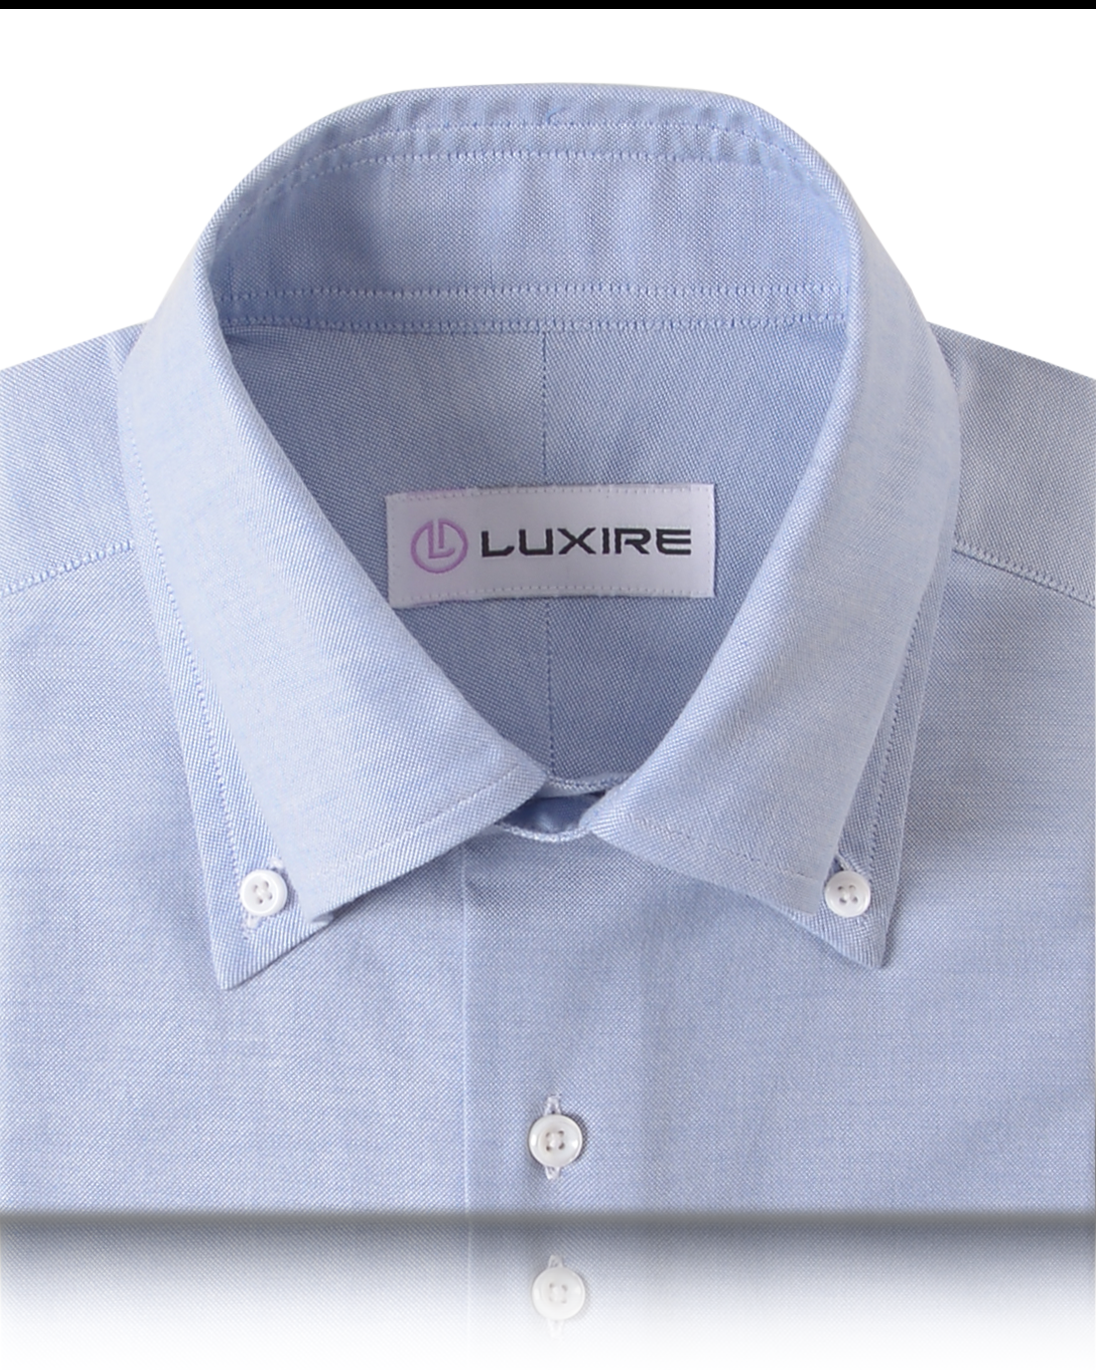 Collar of the custom oxford shirt for men by Luxire in classic blue